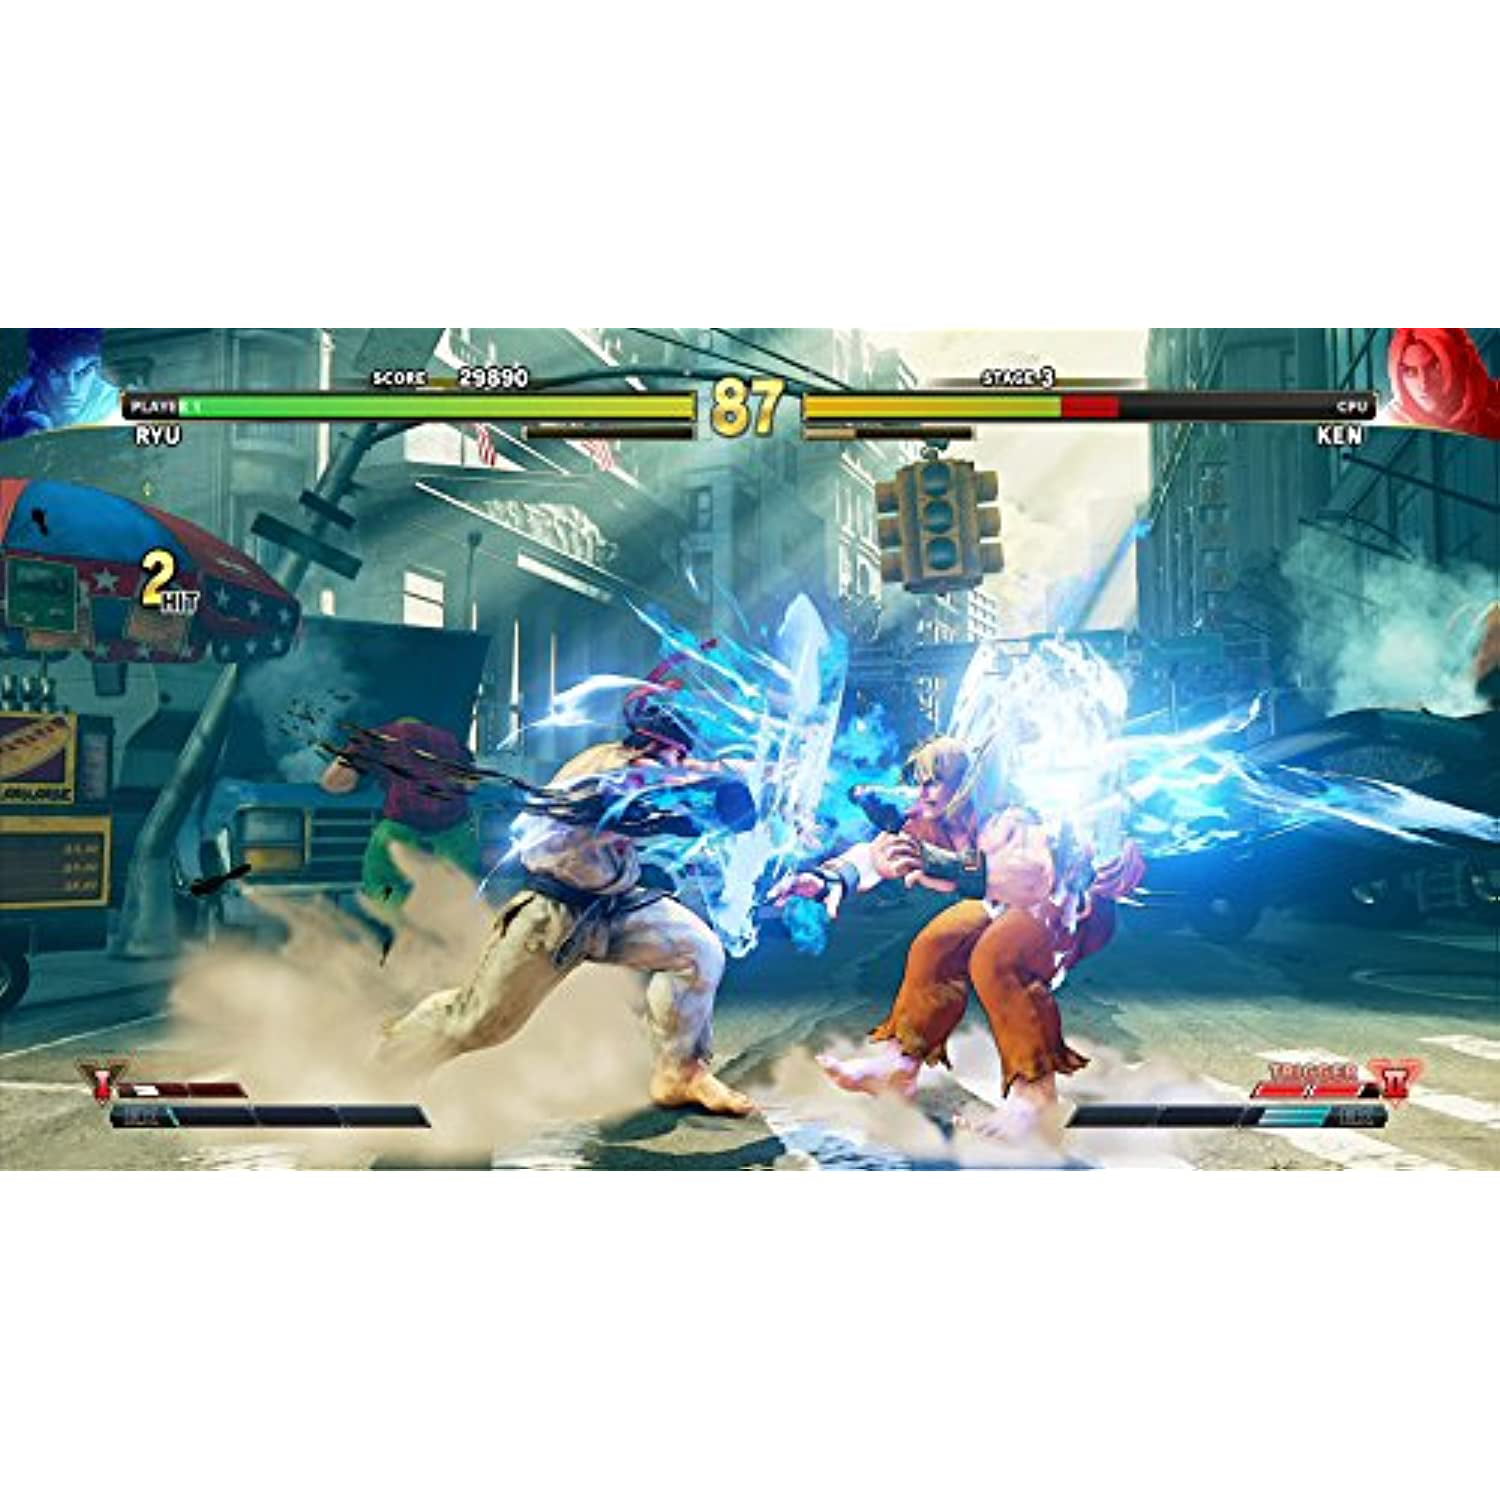 Street Fighter V Arcade Edition (PS4) cheap - Price of $12.51